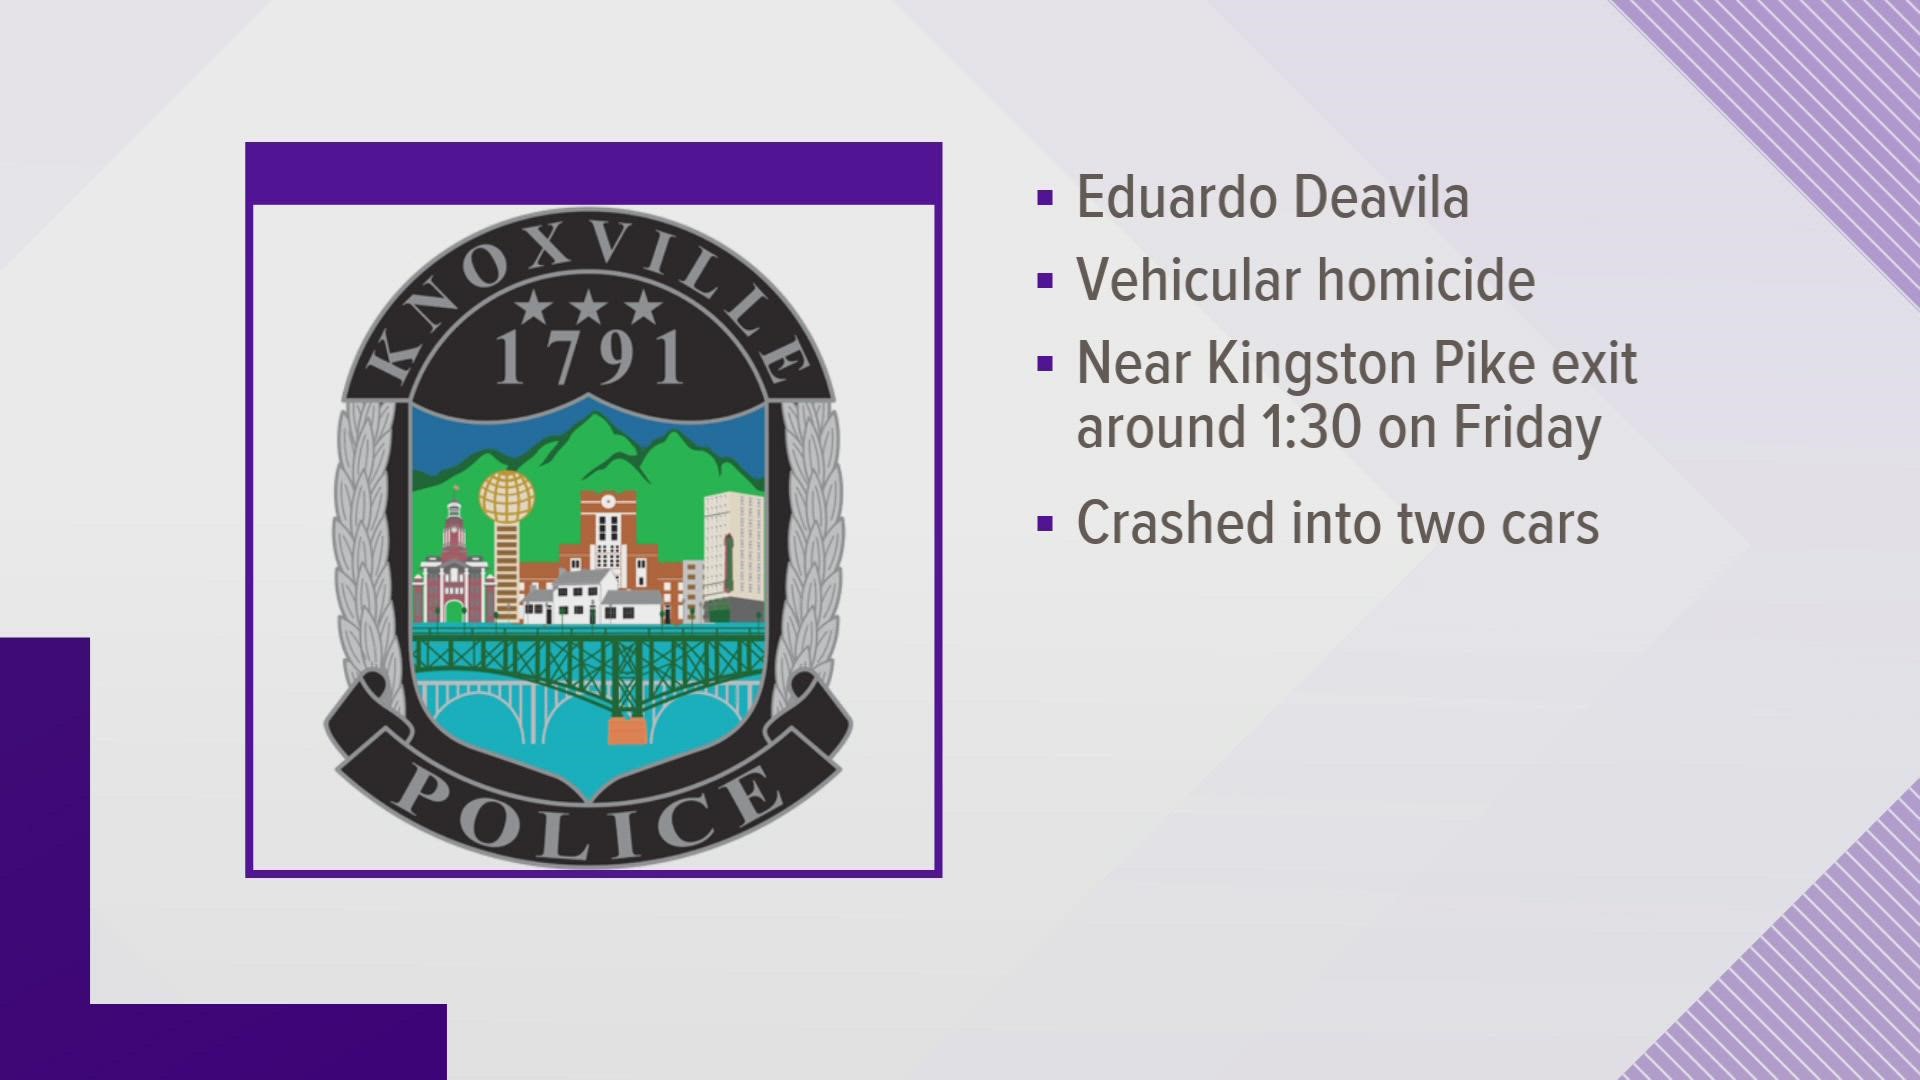 Eduardo Deavila drove the wrong way on Pellissippi Parkway early Friday morning and collided with another car, according to the Knoxville Police Department.